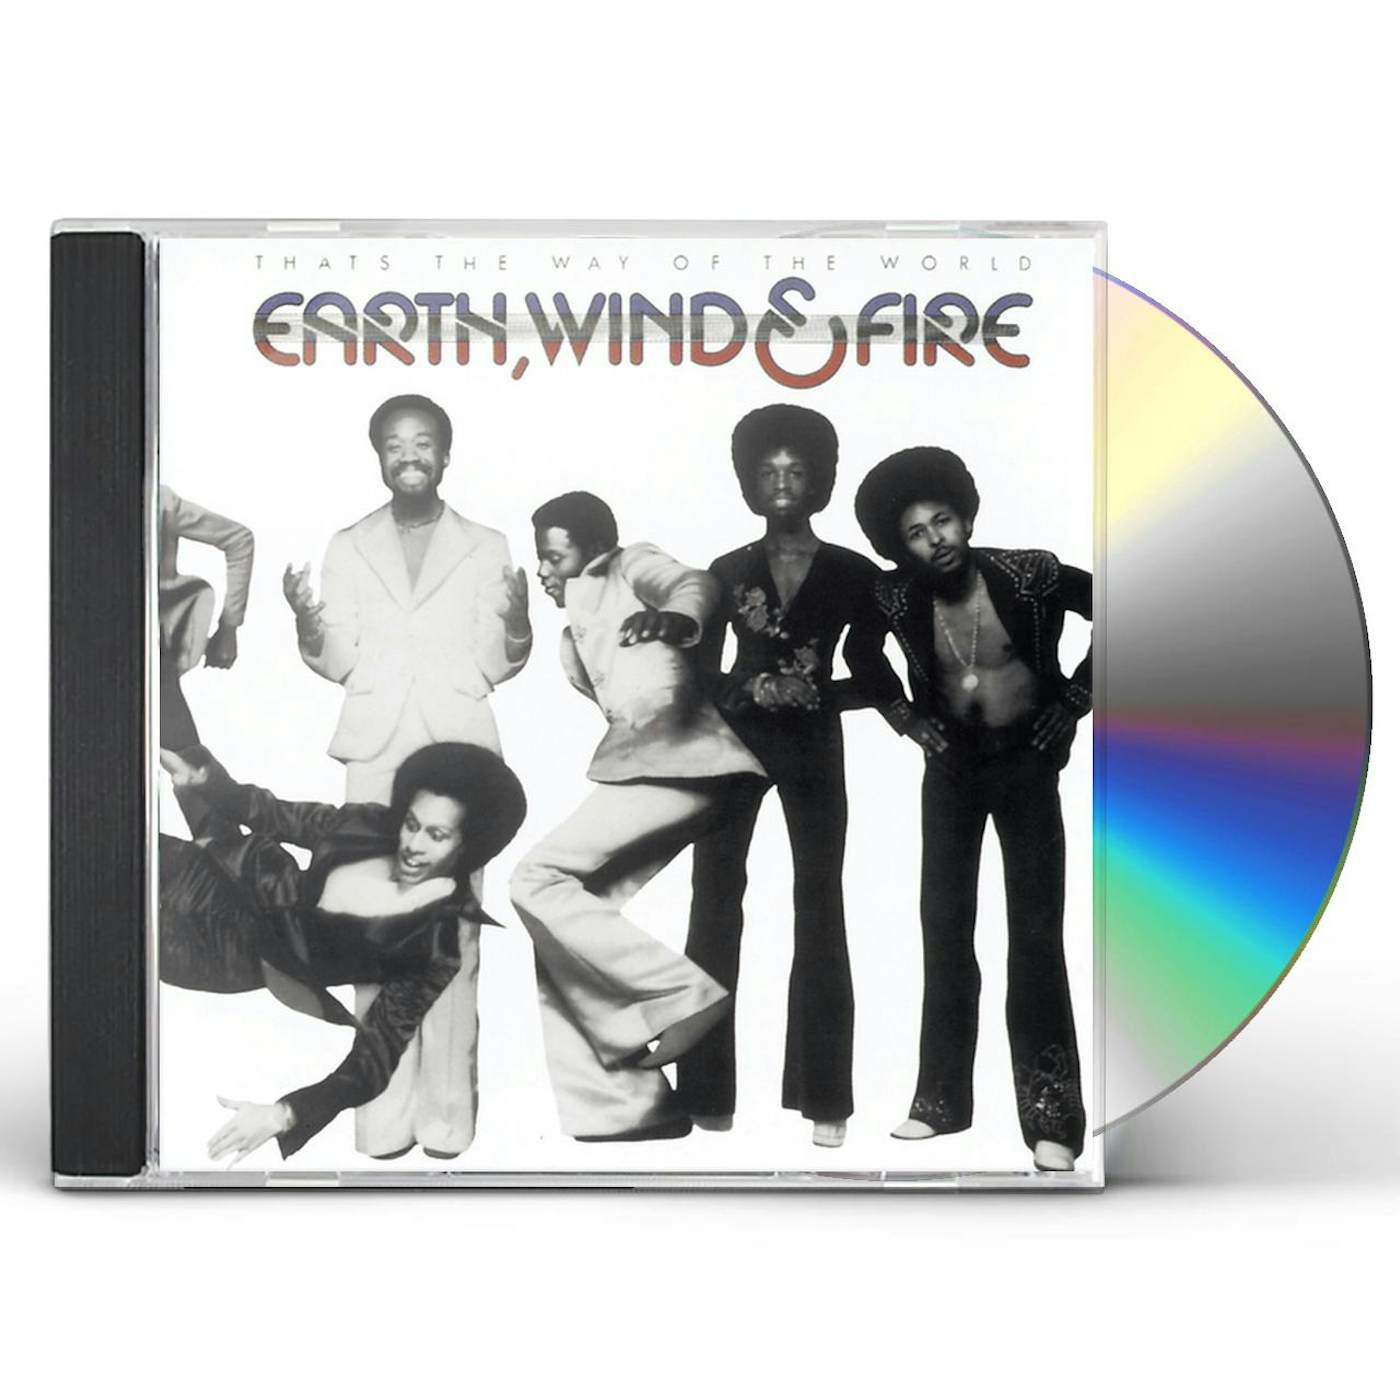 Earth, Wind & Fire THAT'S THE WAY OF THE WORLD CD